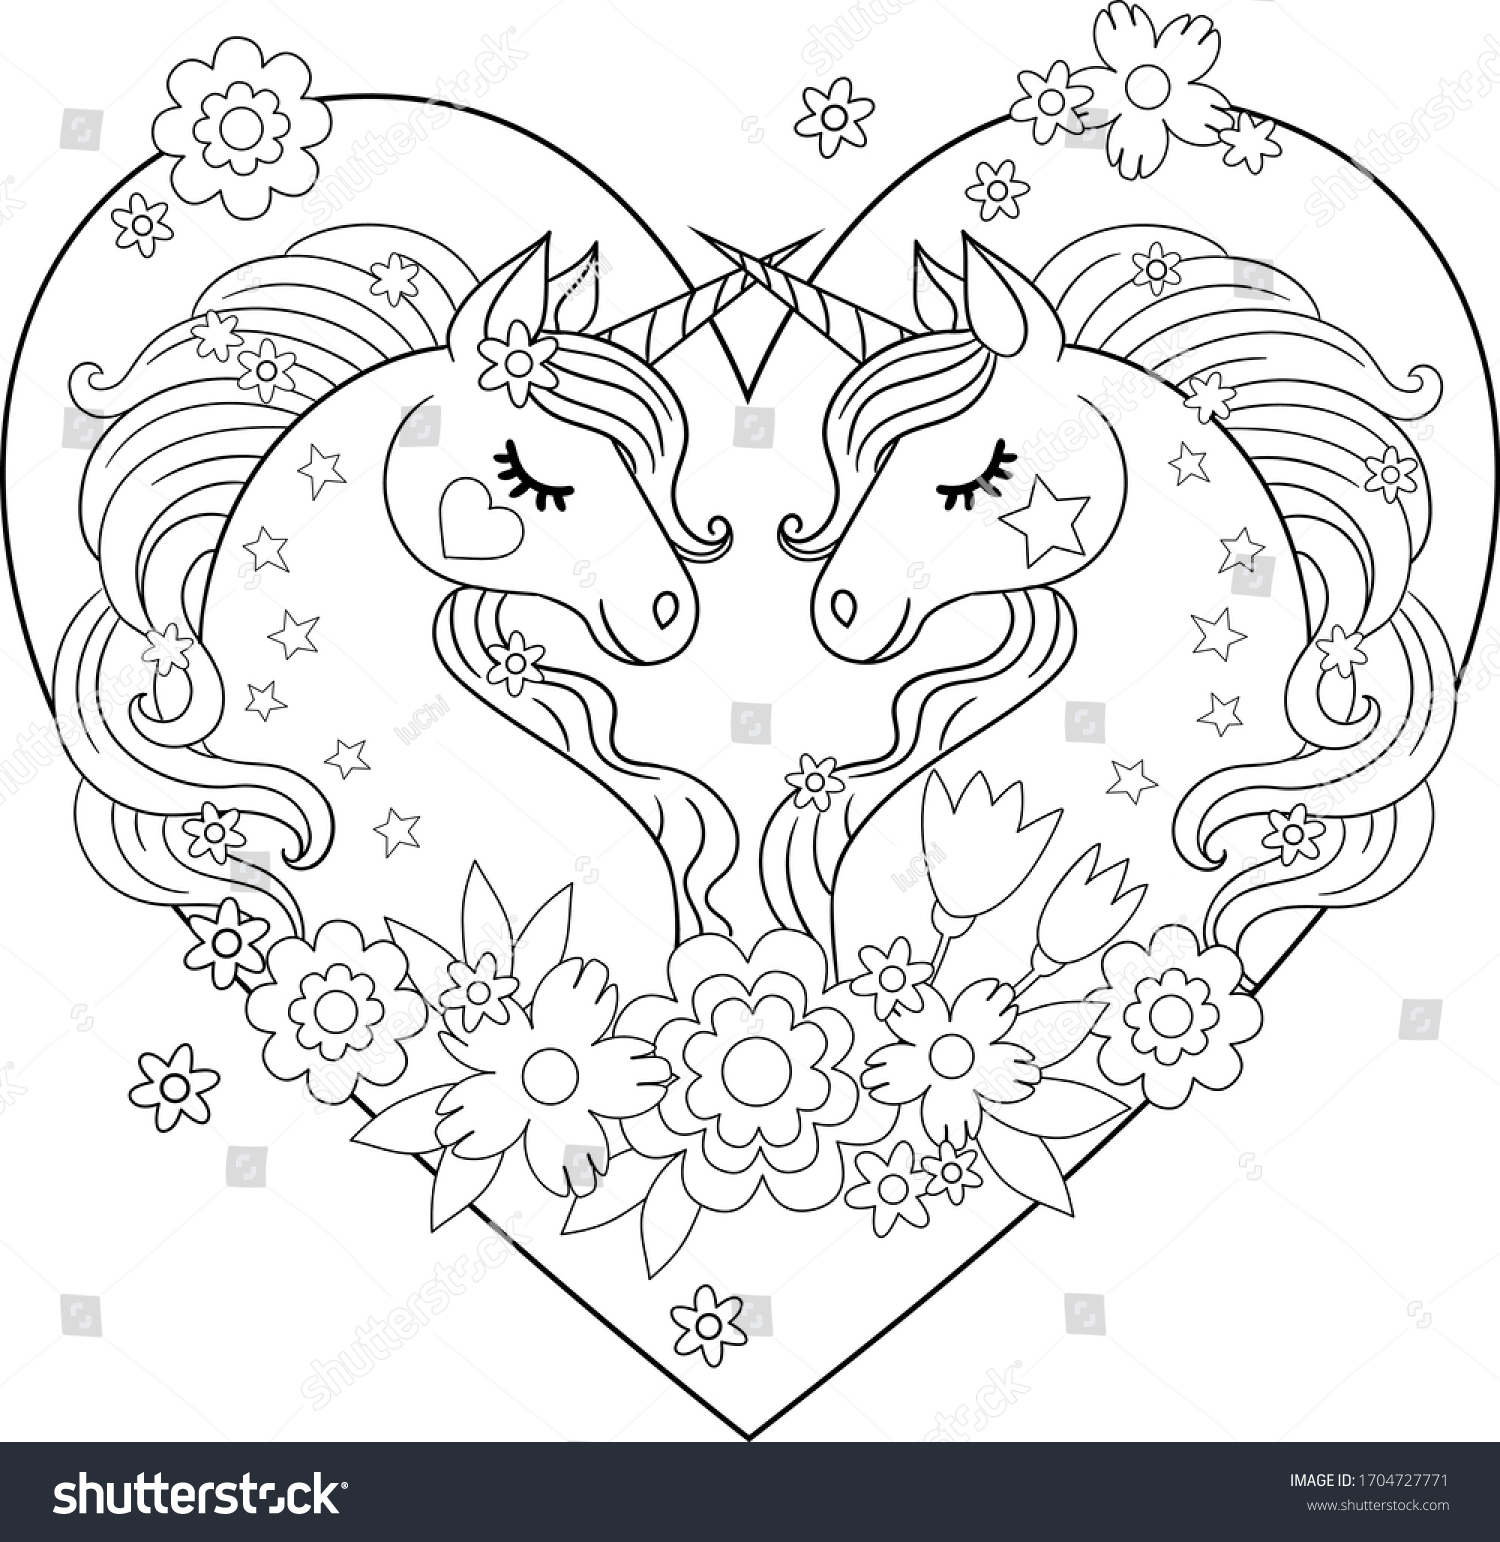 Antistress Coloring Page Two Cute Cartoon Stock Vector Royalty ...